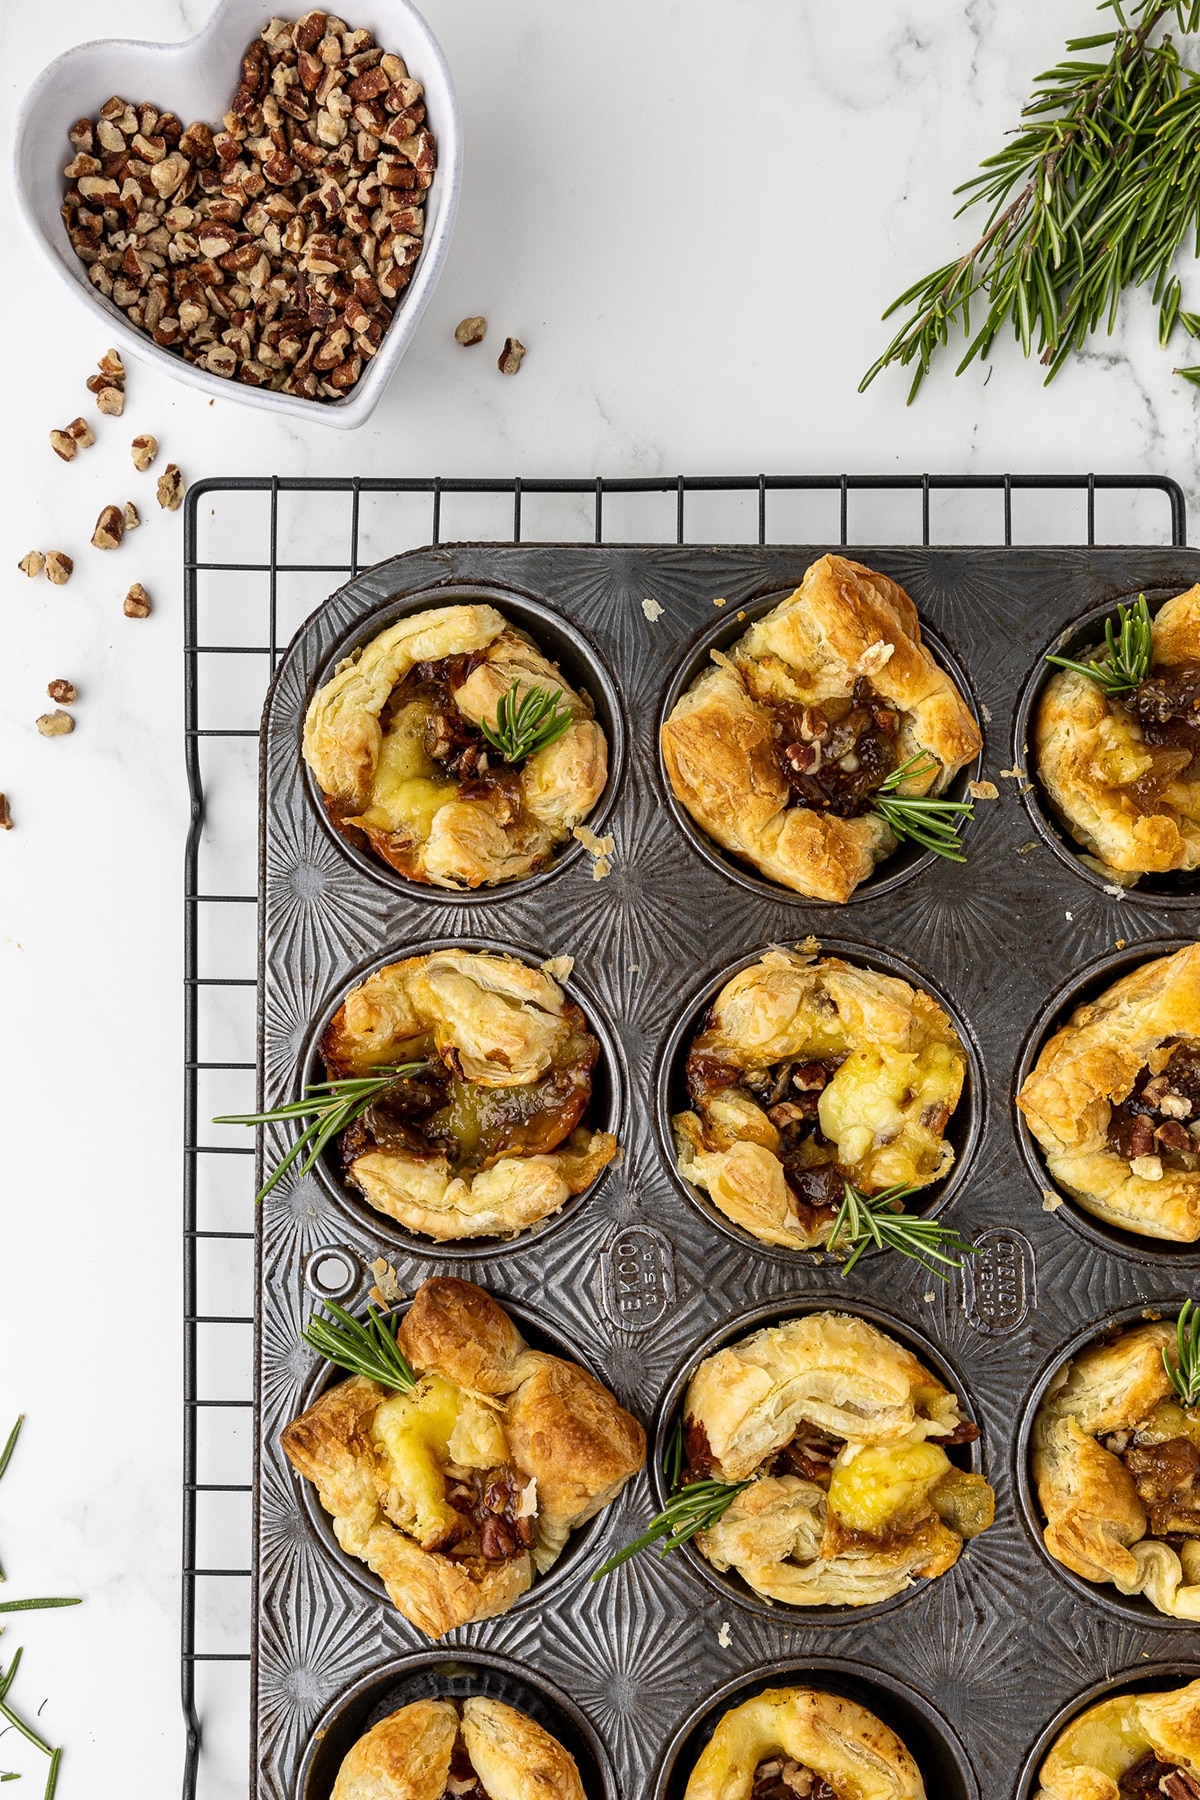 antique muffin pan filled with baked brie bites on black cooling rack sitting on a white marble countertop with rosemary and a heart shaped dish full of walnuts in the back